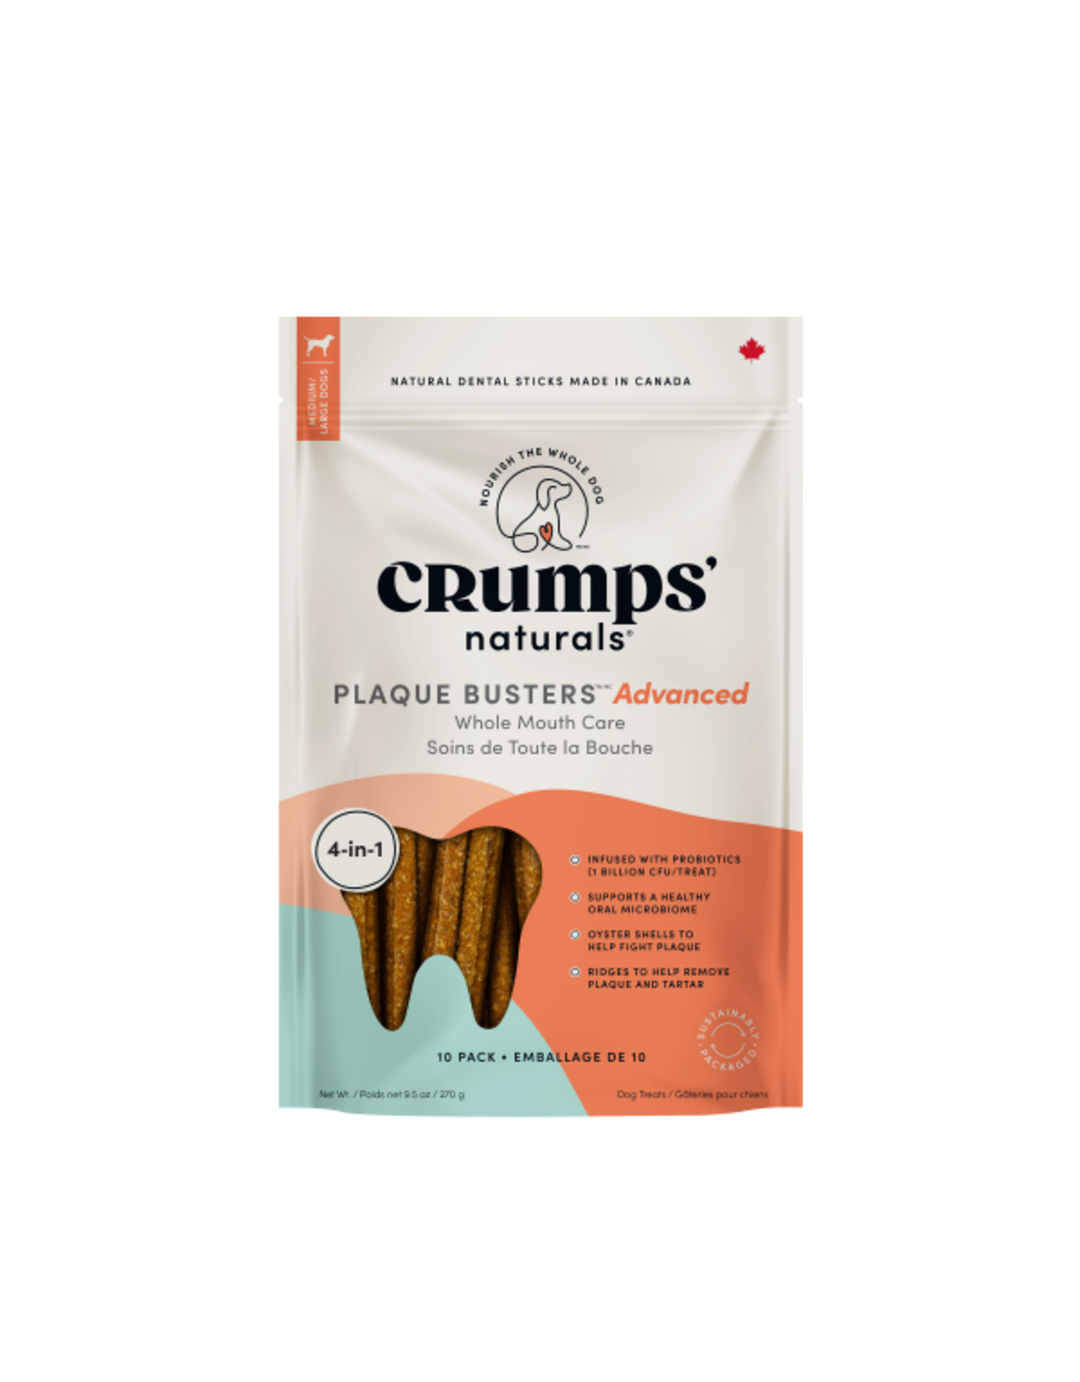 Crumps' Naturals Dog Plaque Busters with Probiotcs